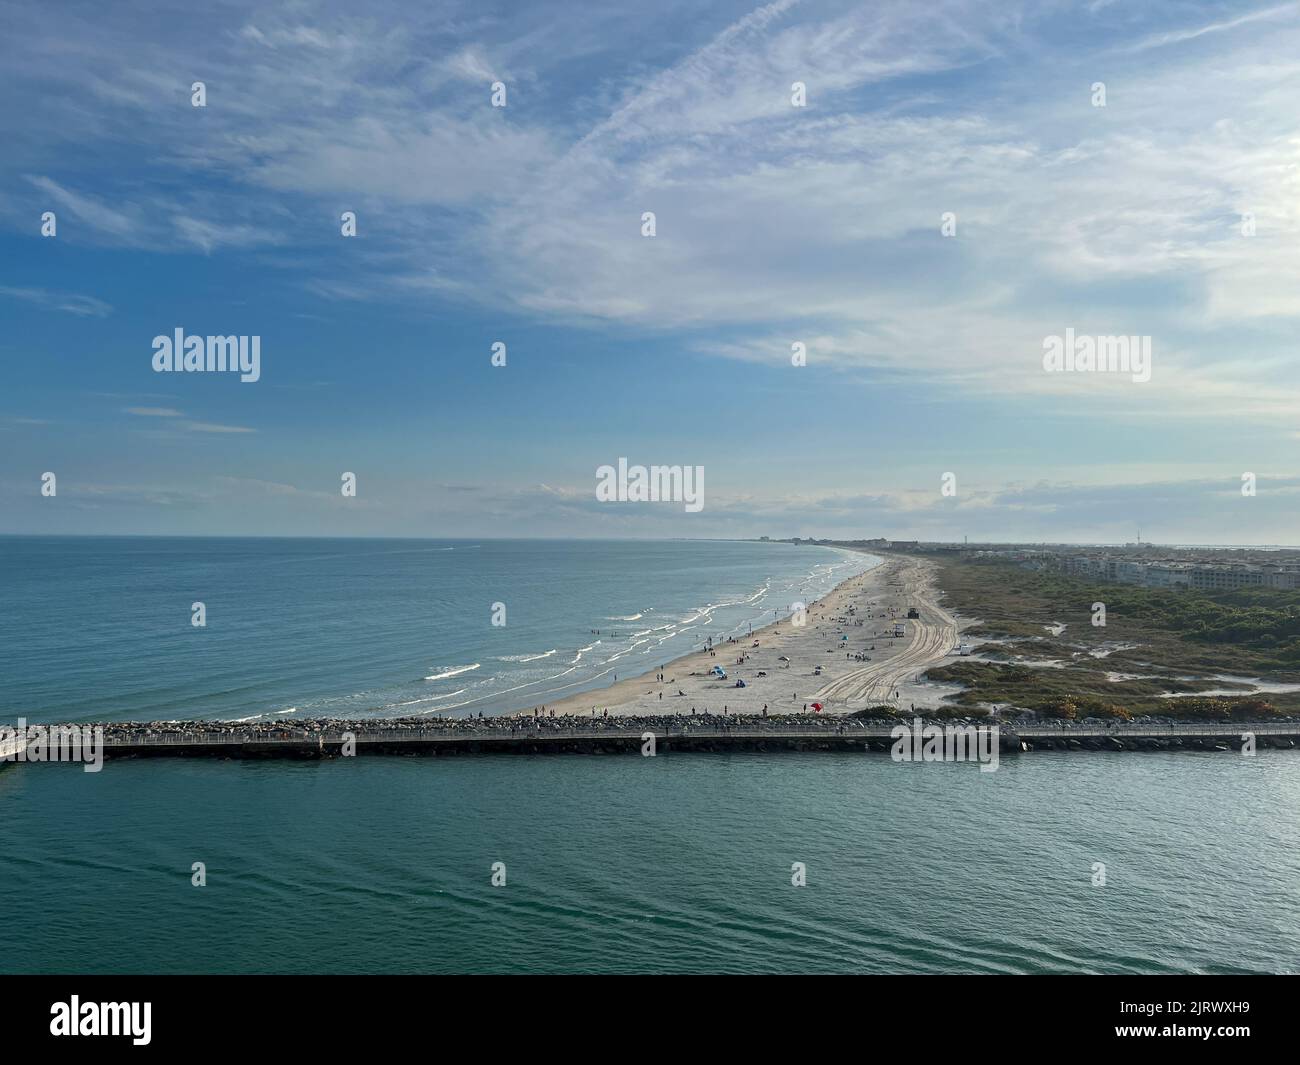 Orlando, FL USA - February 12, 2022: An aerial view of Port Canaveral in Florida. Stock Photo